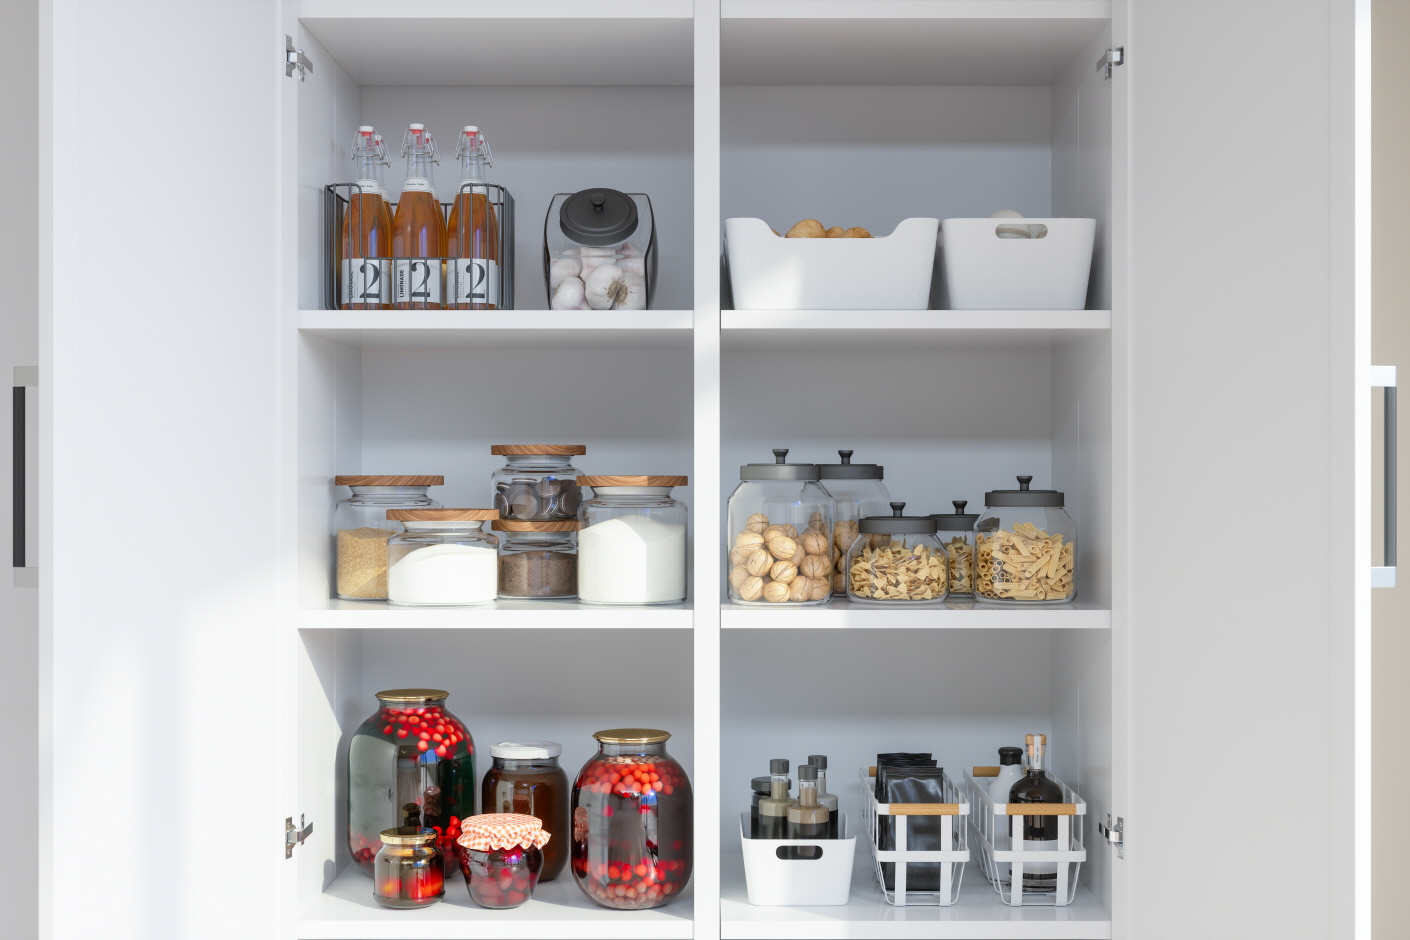 Maximize your pantry's existing space for efficient use.